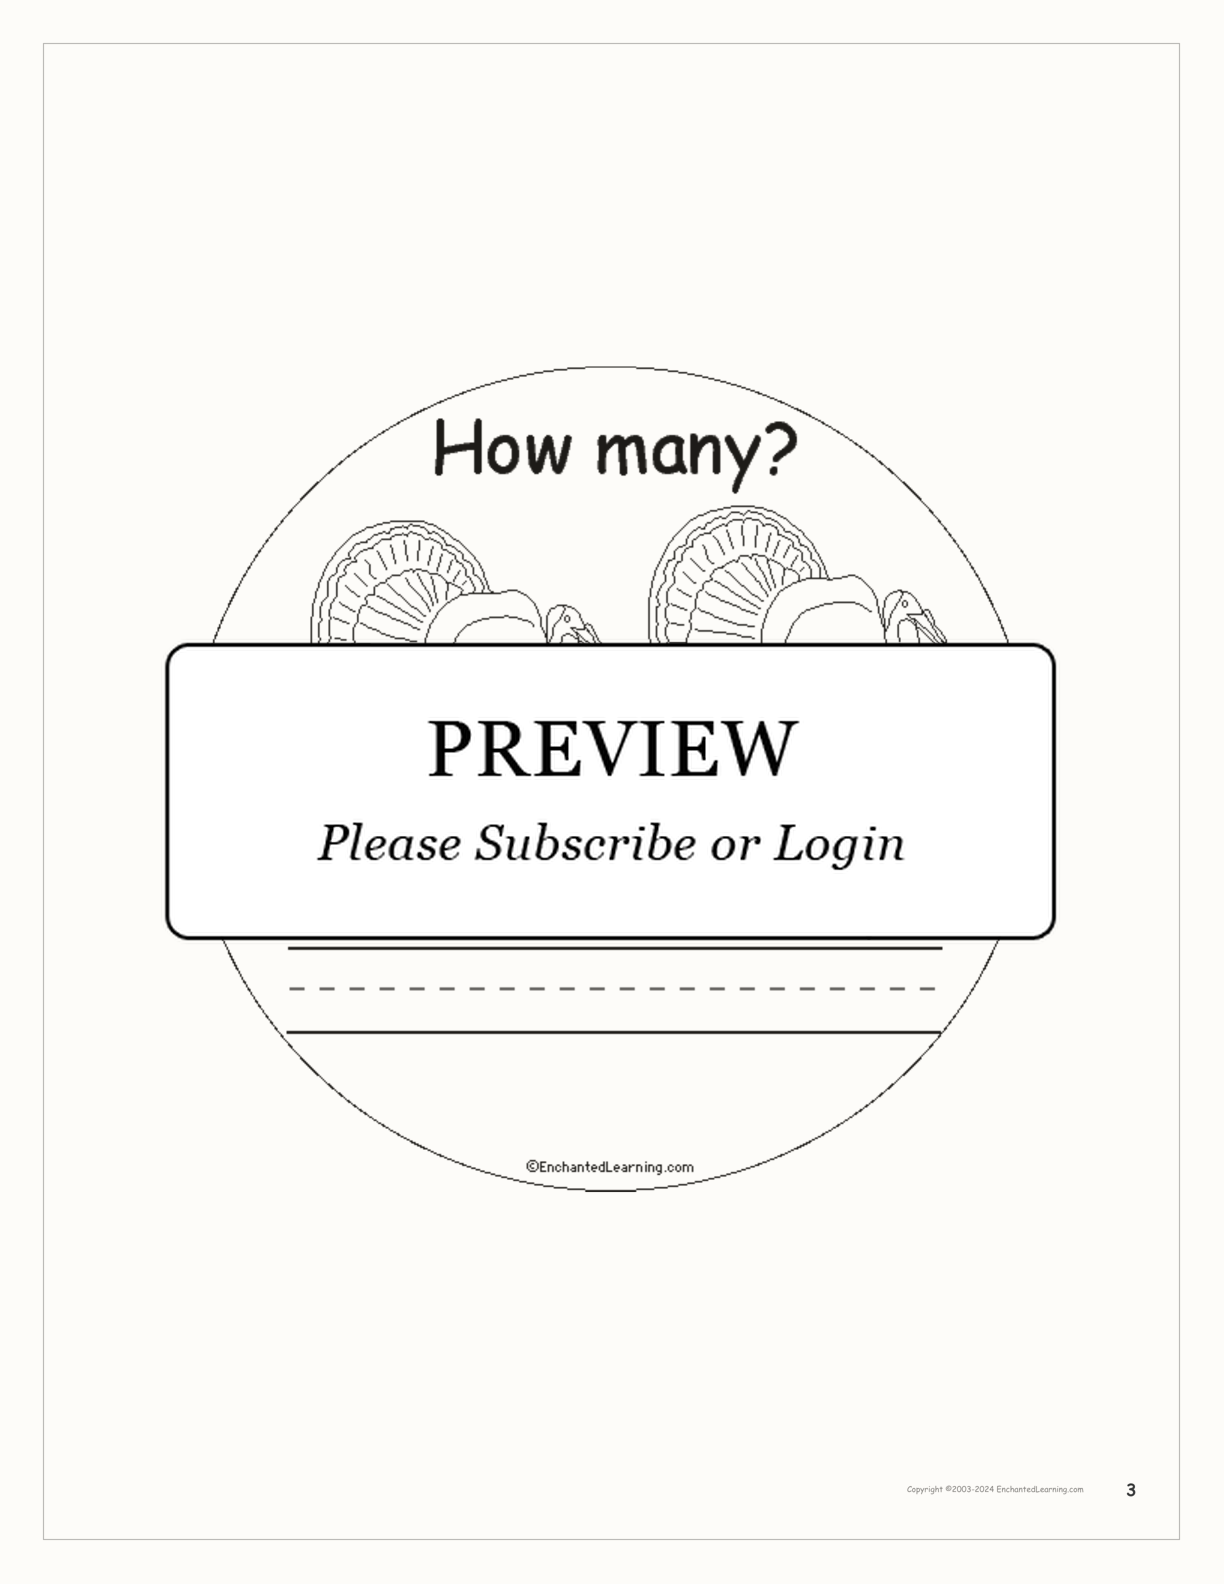 How Many Turkeys? interactive printout page 3